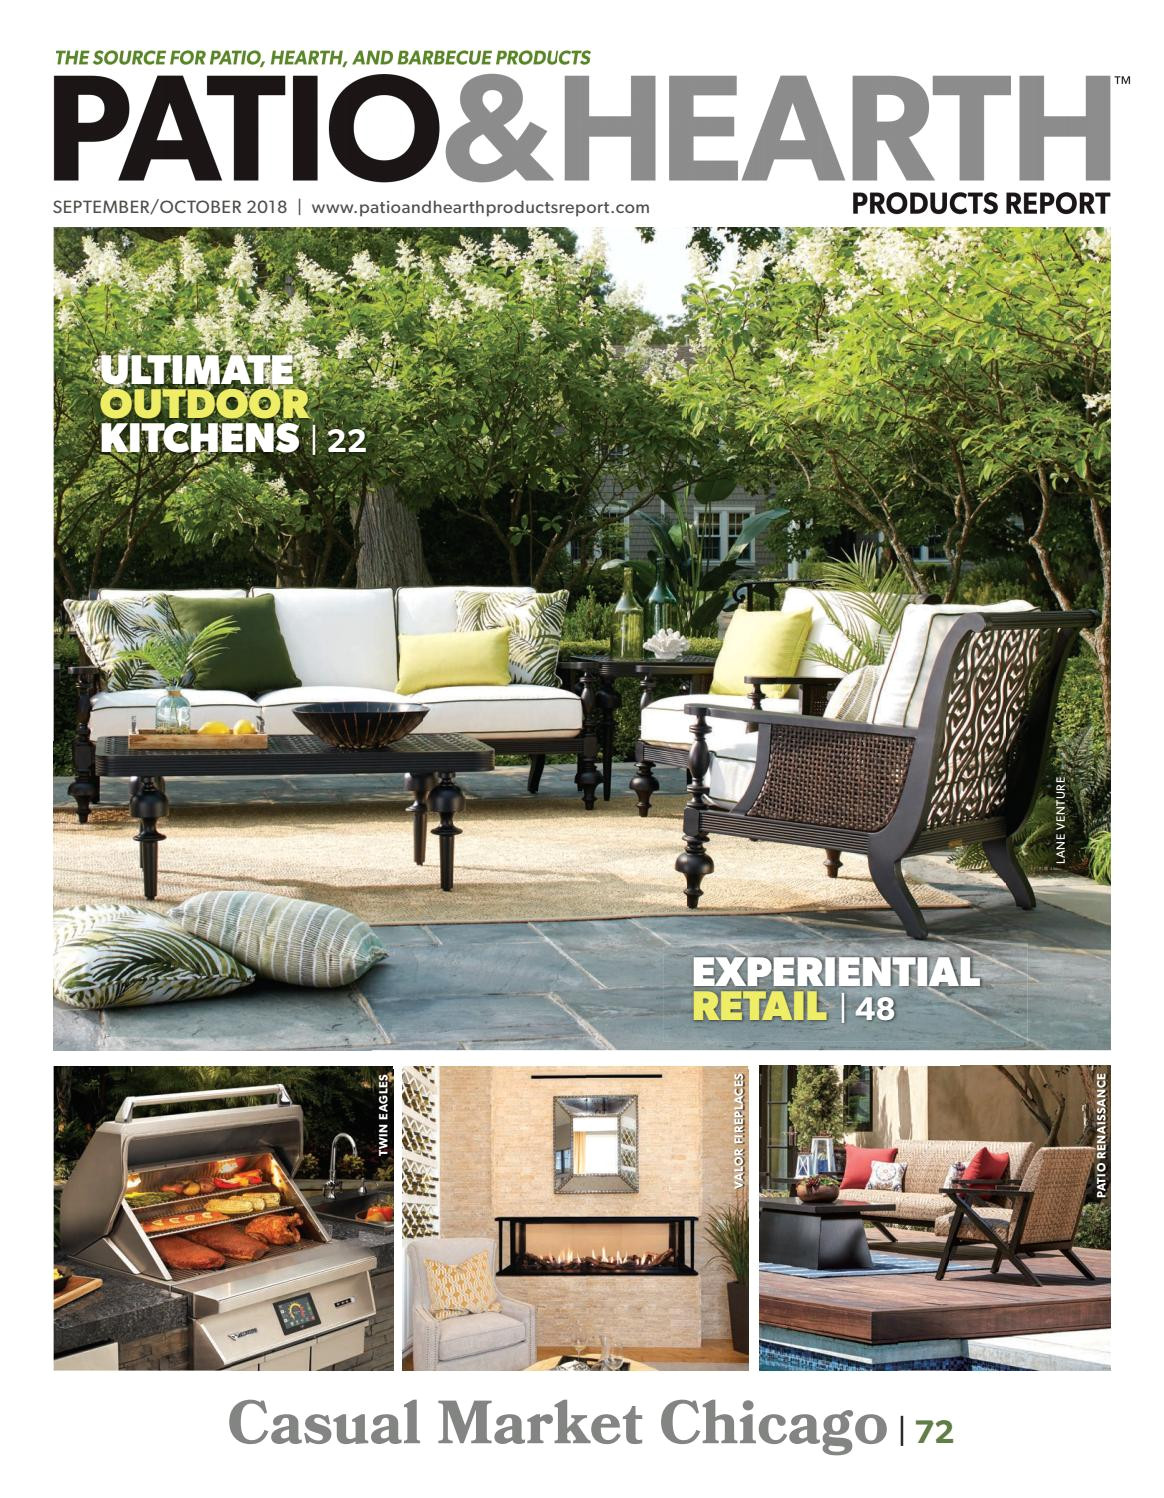 patio hearth products report september october 2018 by peninsula media issuu